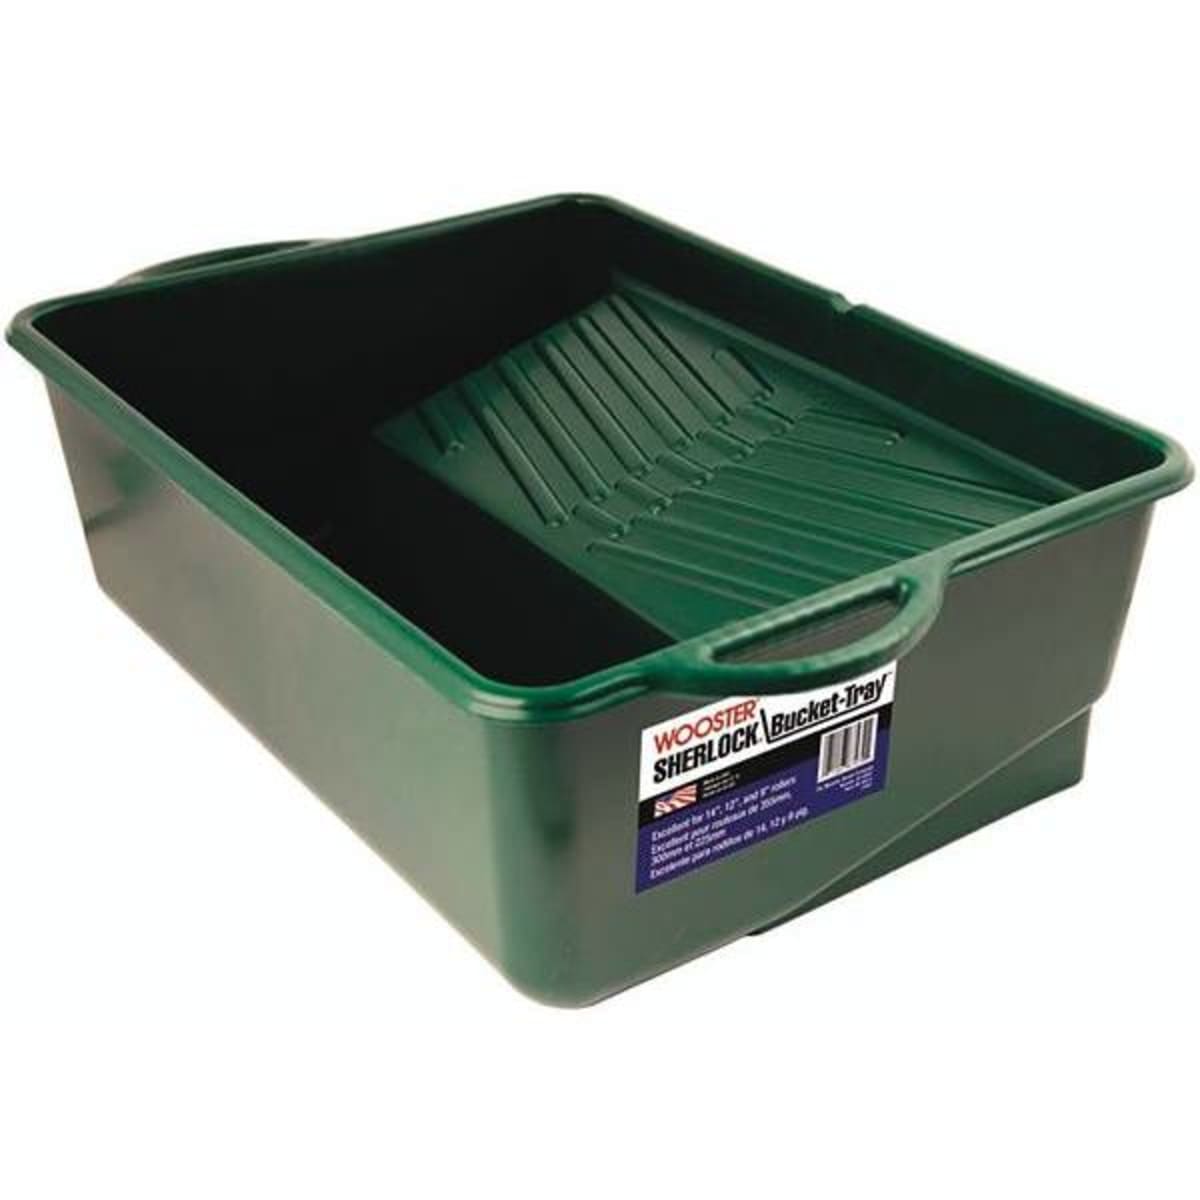 48 Pack of 11 Wooster R406 Wooster Solvent Resistant Paint Roller Tray  Liner, Painting Equipment & Supplies, Paint Trays, Liners & Bucket Grids, Roller  Trays & Liners